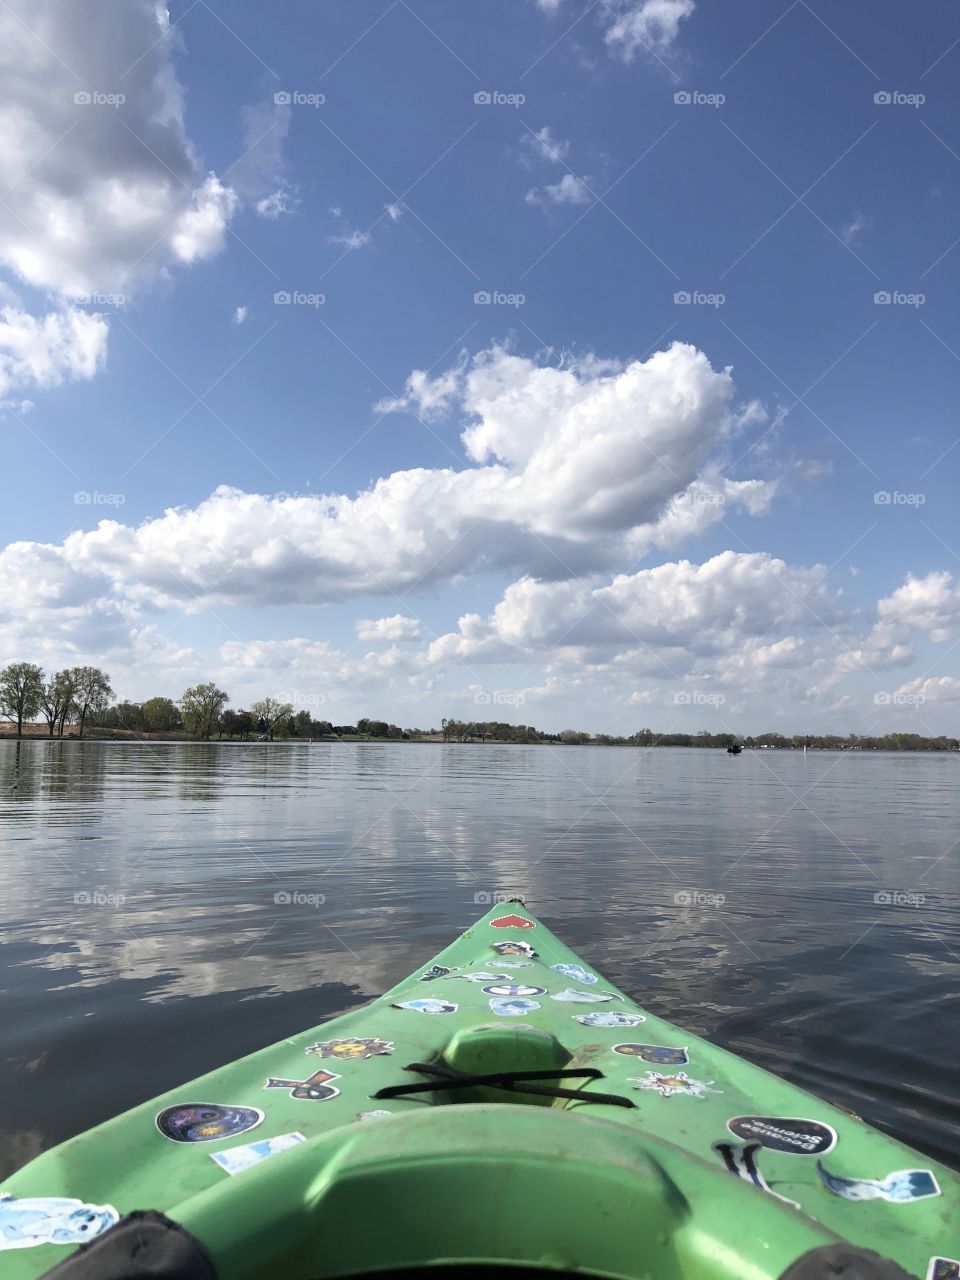 Kayaking past fluffy clouds on the open lake 